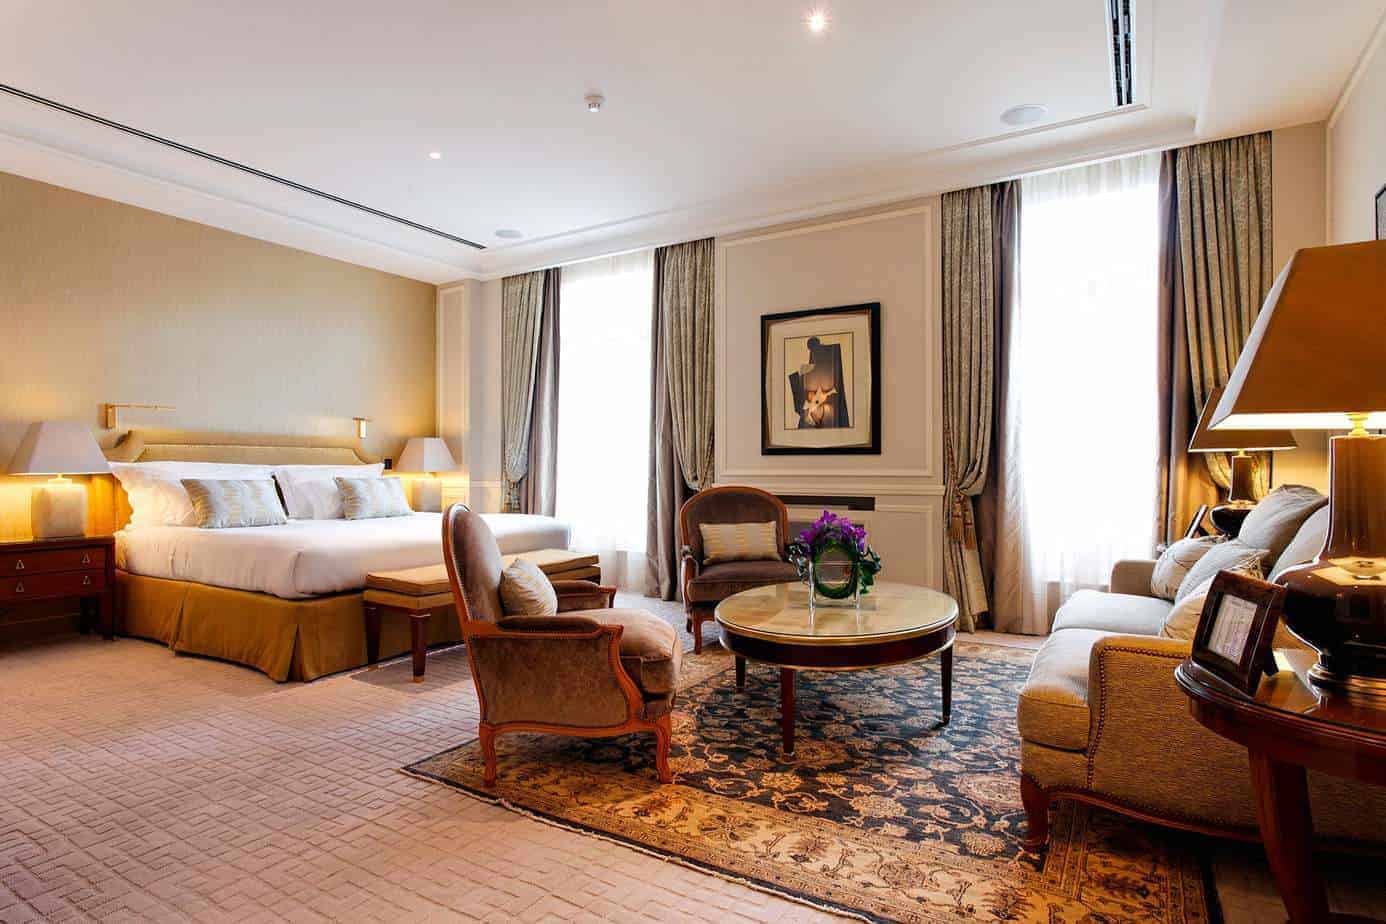 Classic and sophisticated rooms in the heart of Brussels